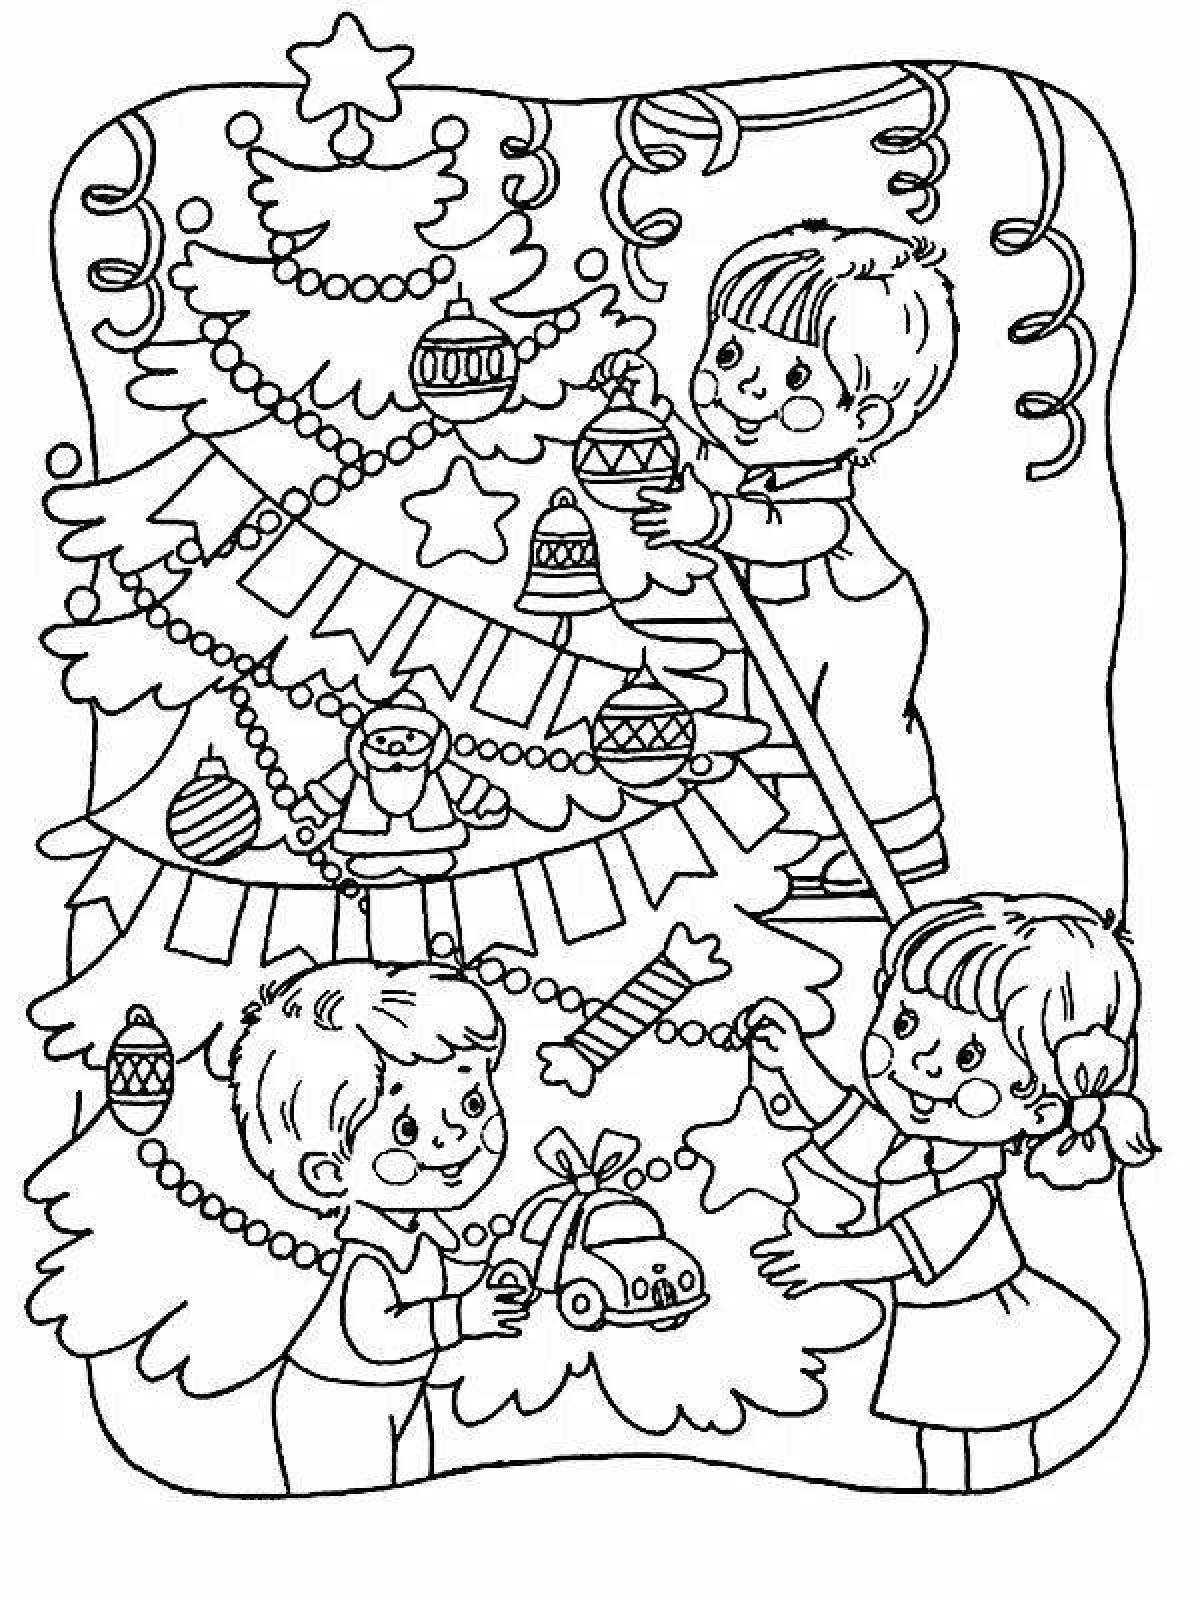 New Year Celebration Coloring Page